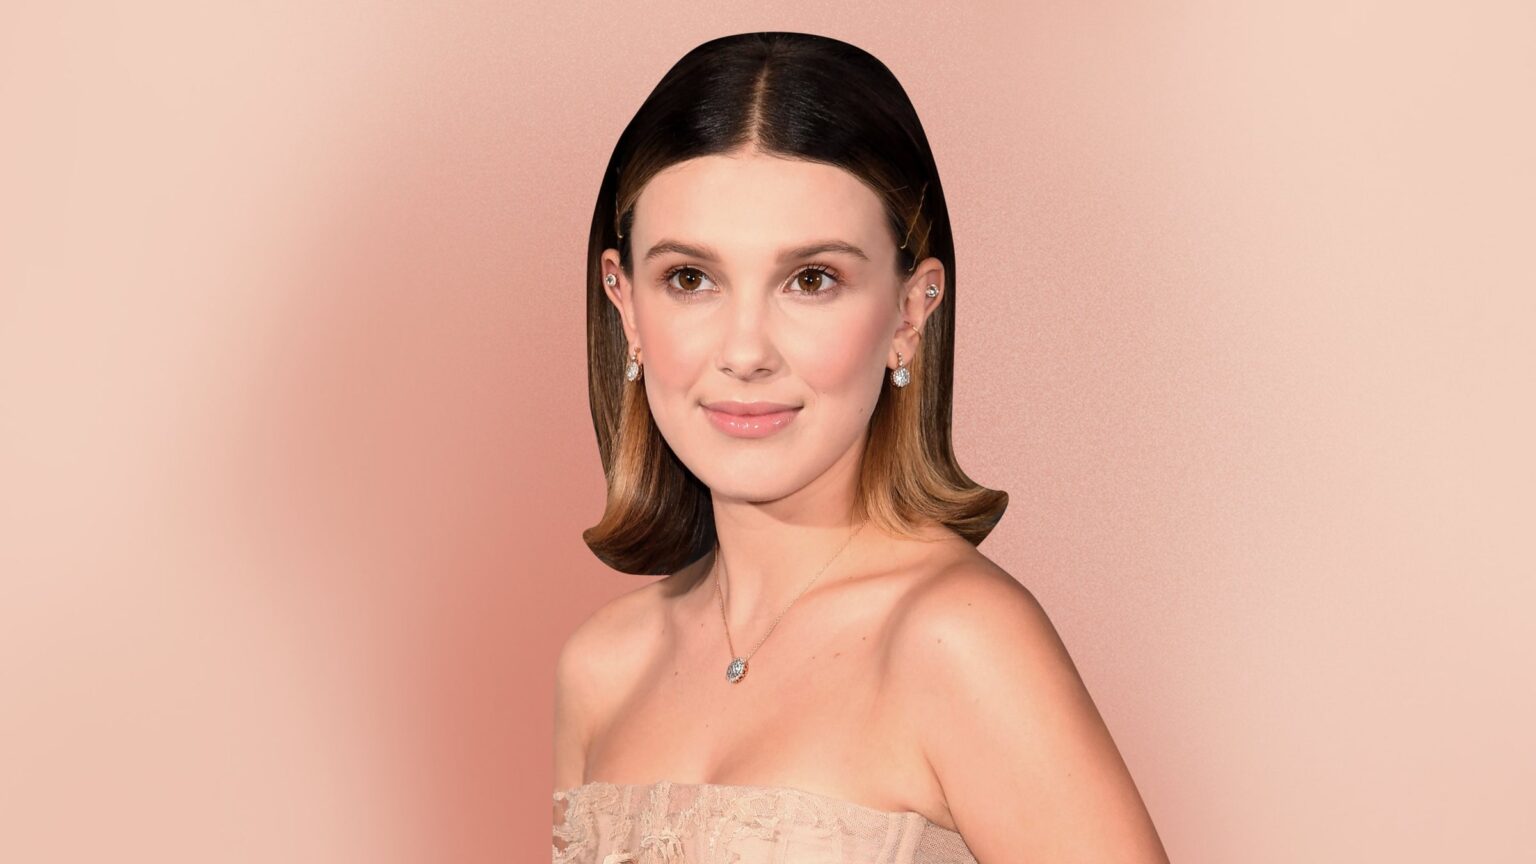 TikTok star Hunter Echo revealed that he was allegedly dating Millie Bobby Brown last year. Could the grooming rumors be true?